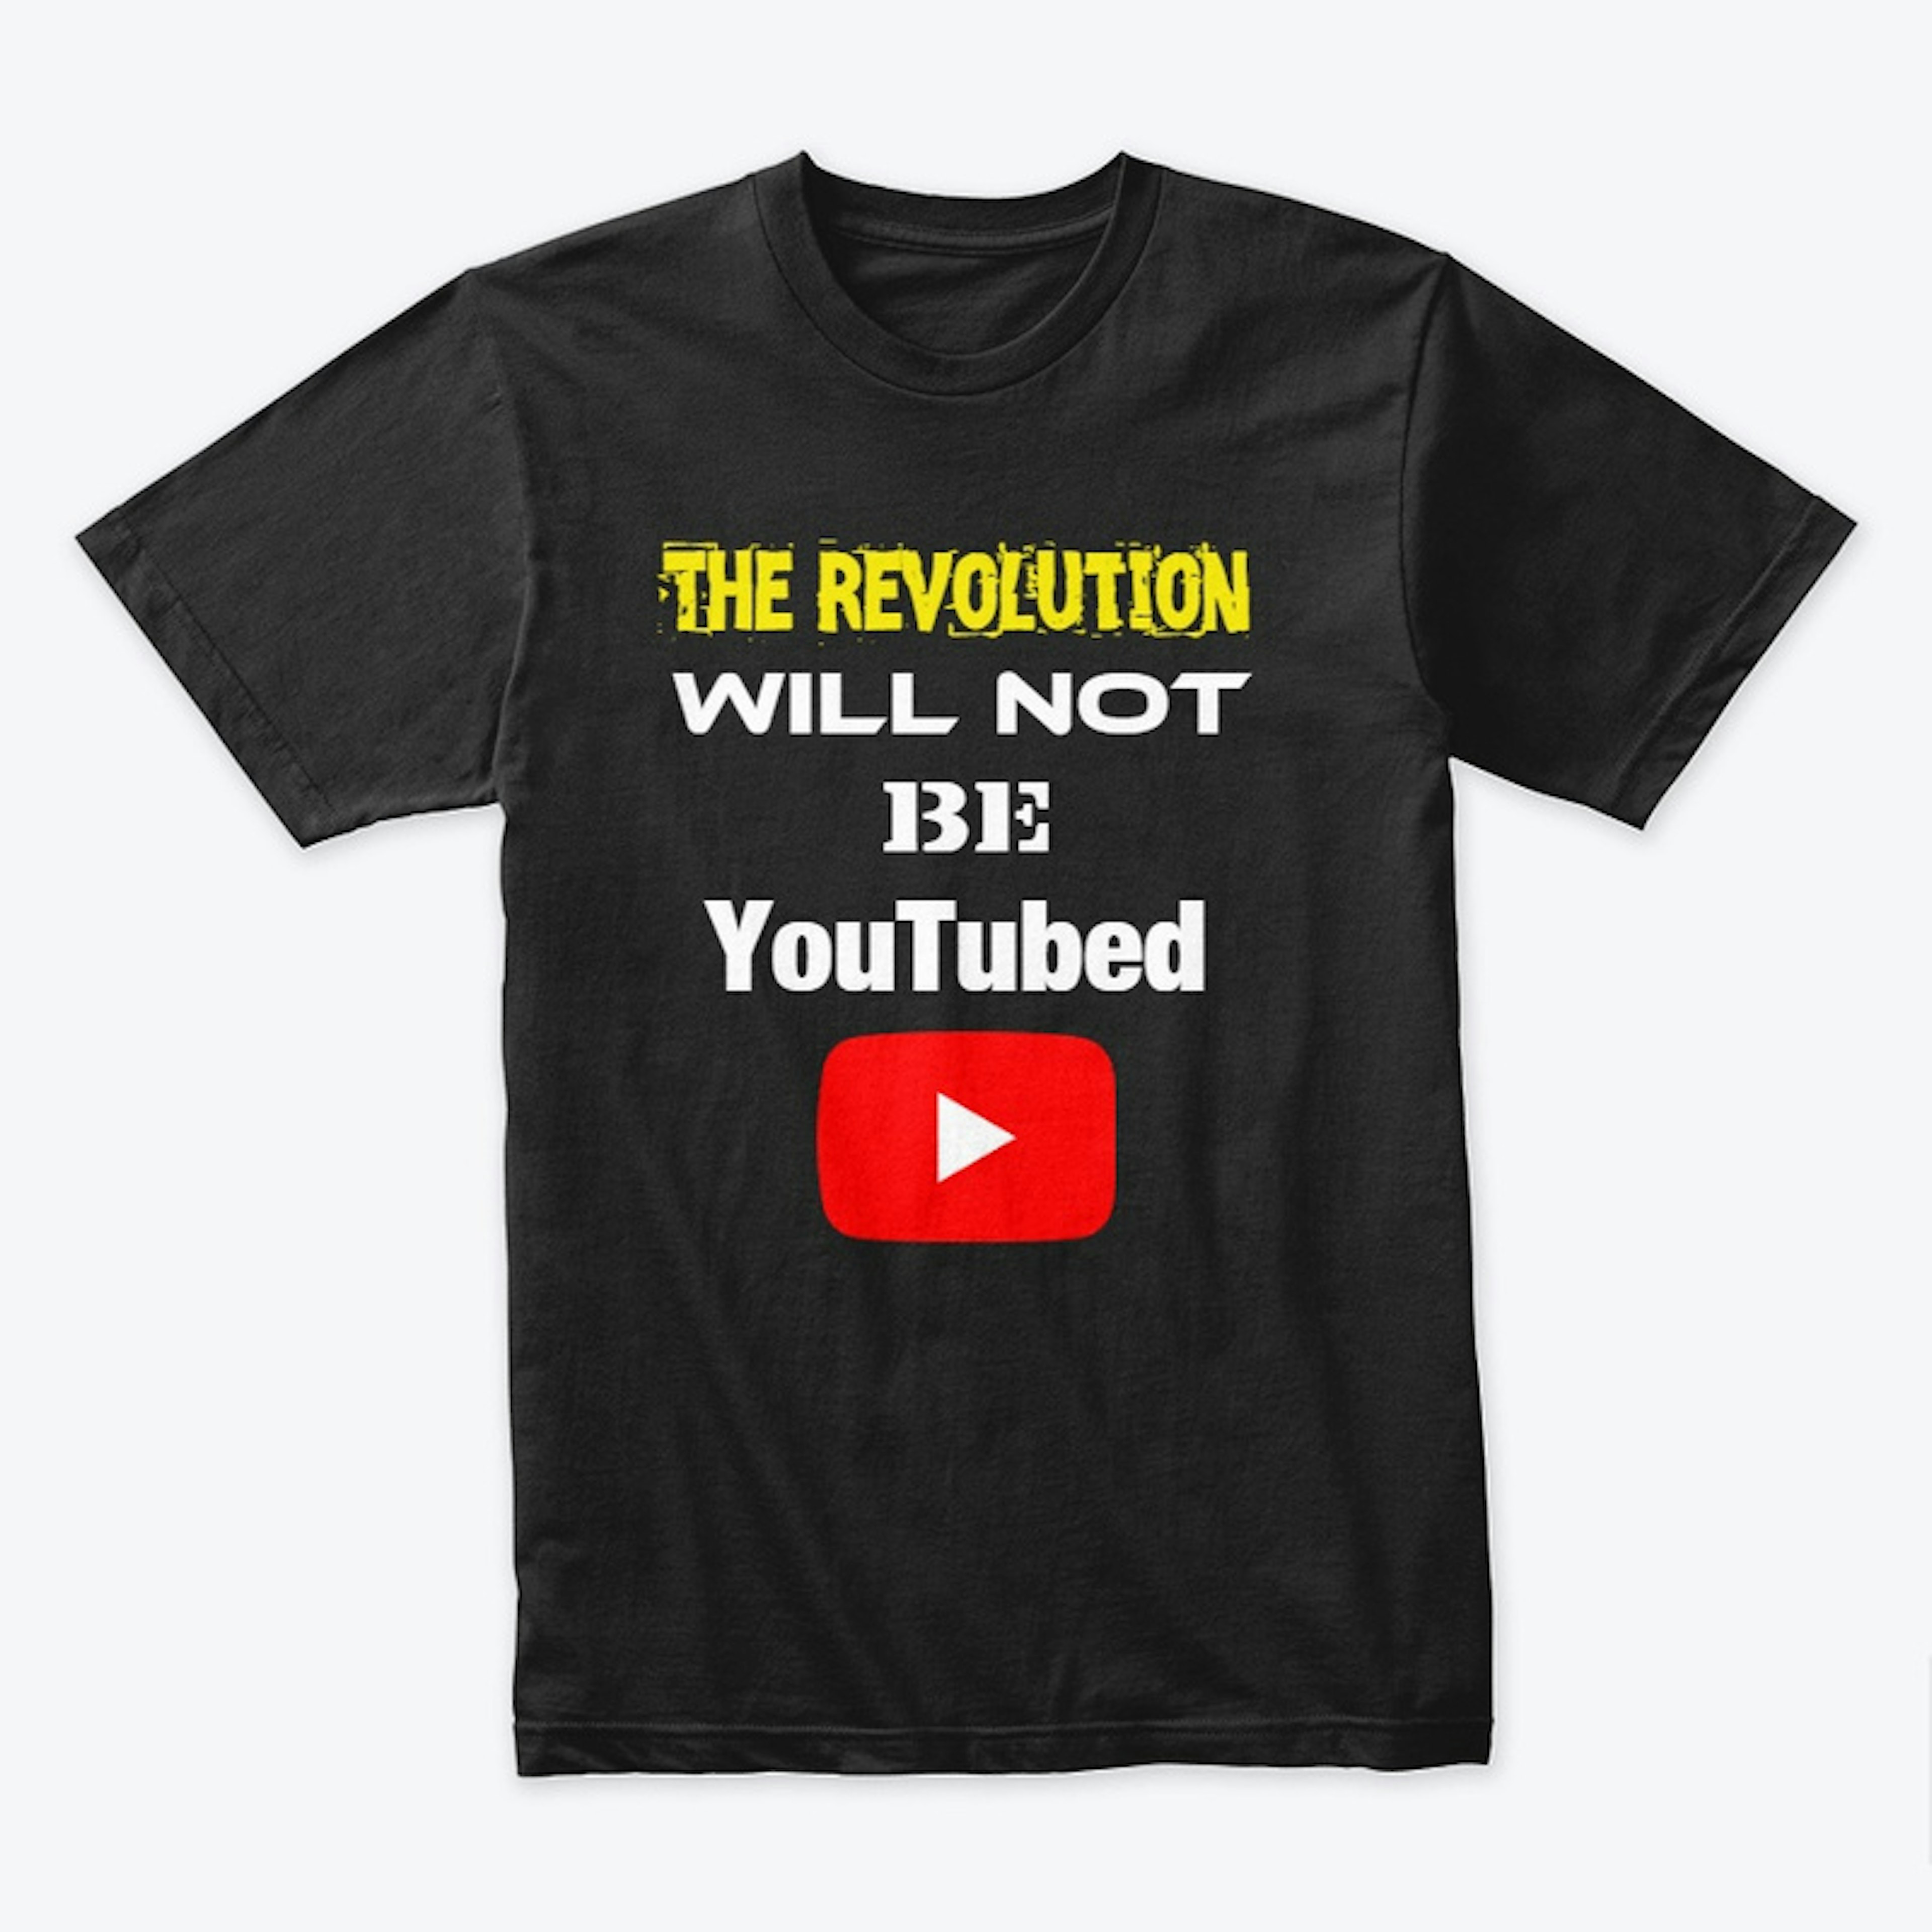 The Revolution Will NOT Be YouTubed